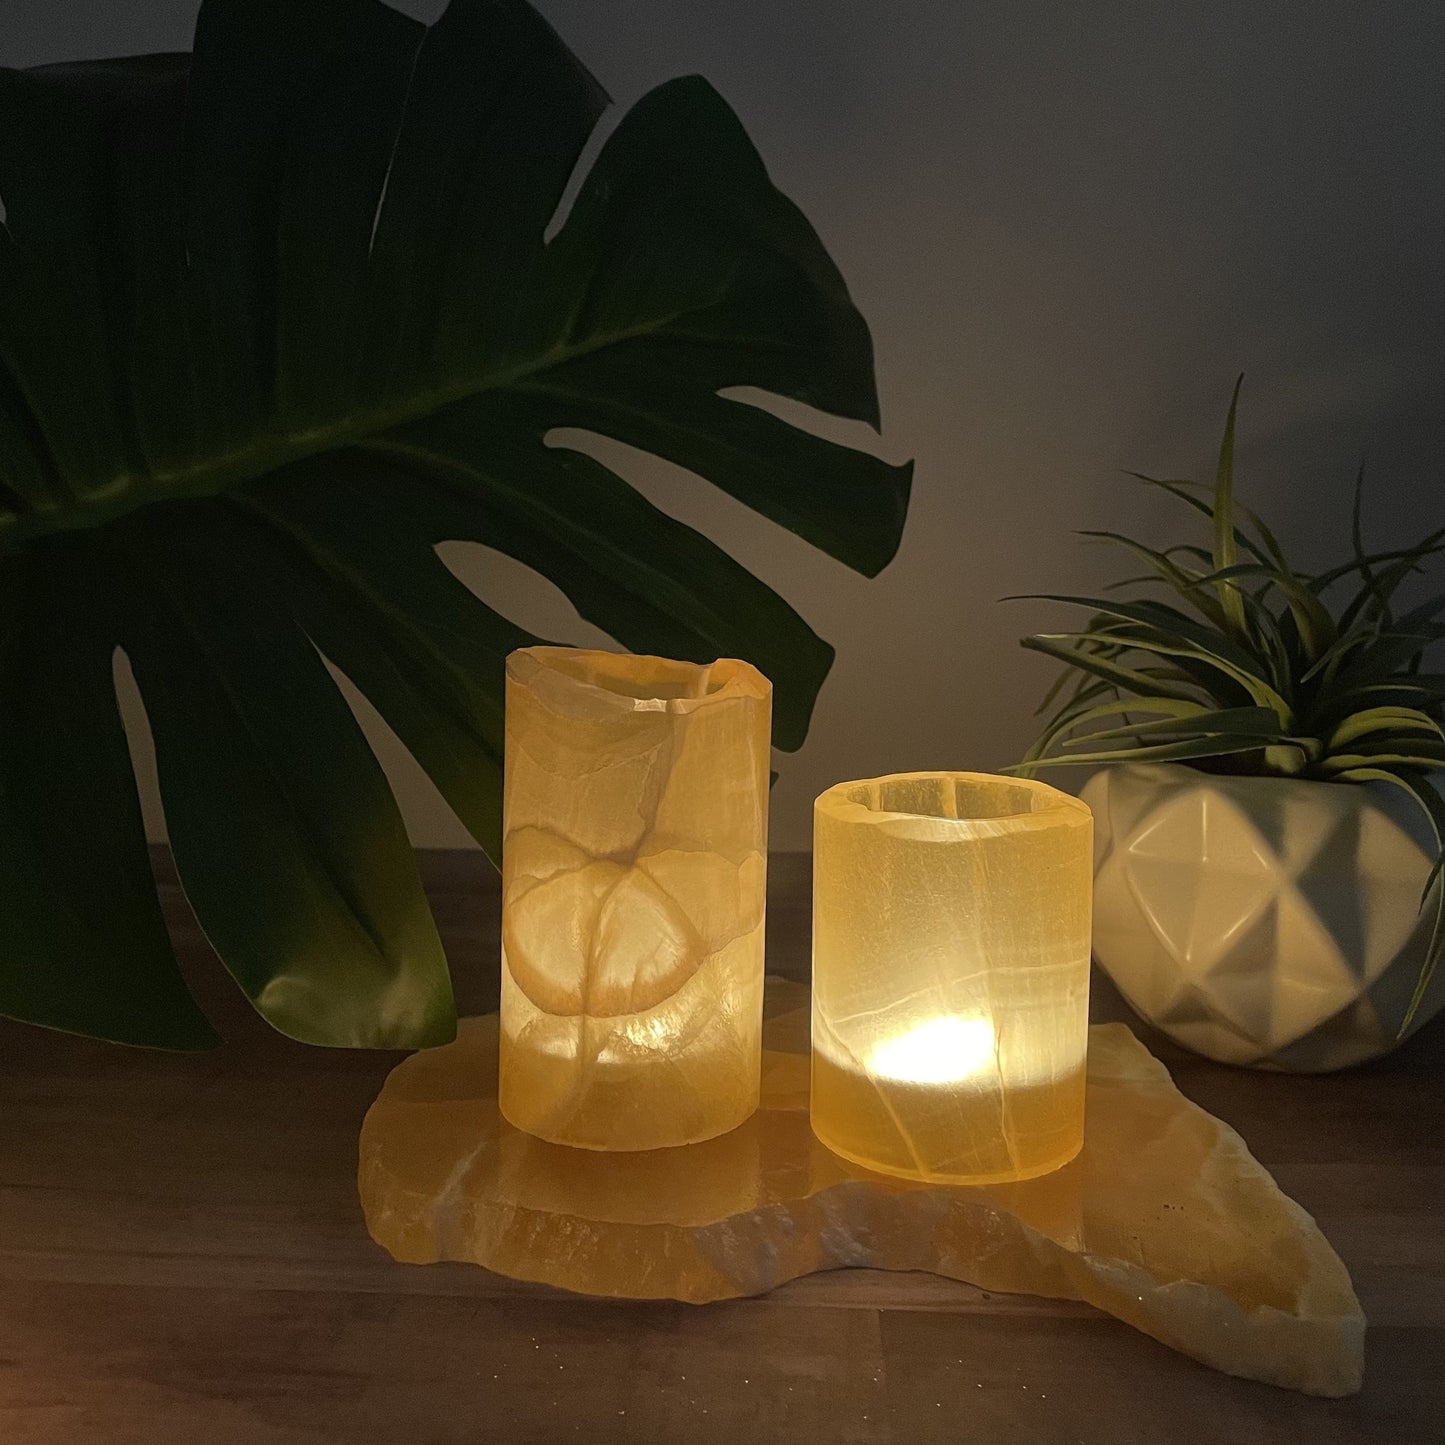 Pixie - Size 2-1/4" Wide Thin fits 1 tealight